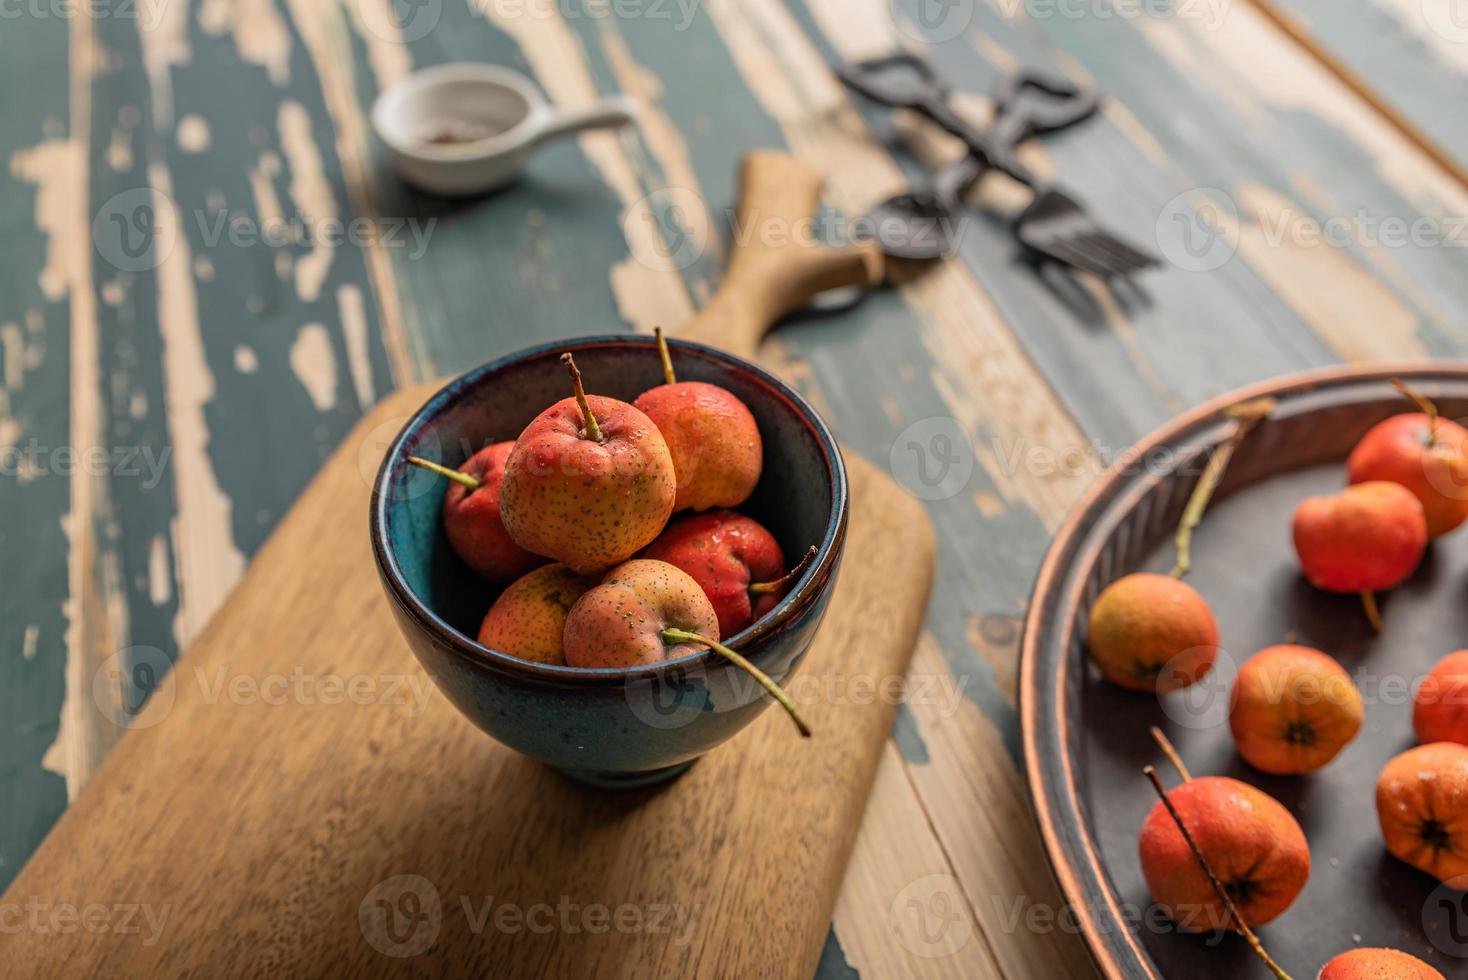 The red Hawthorn in the bowl is placed on the wooden table photo